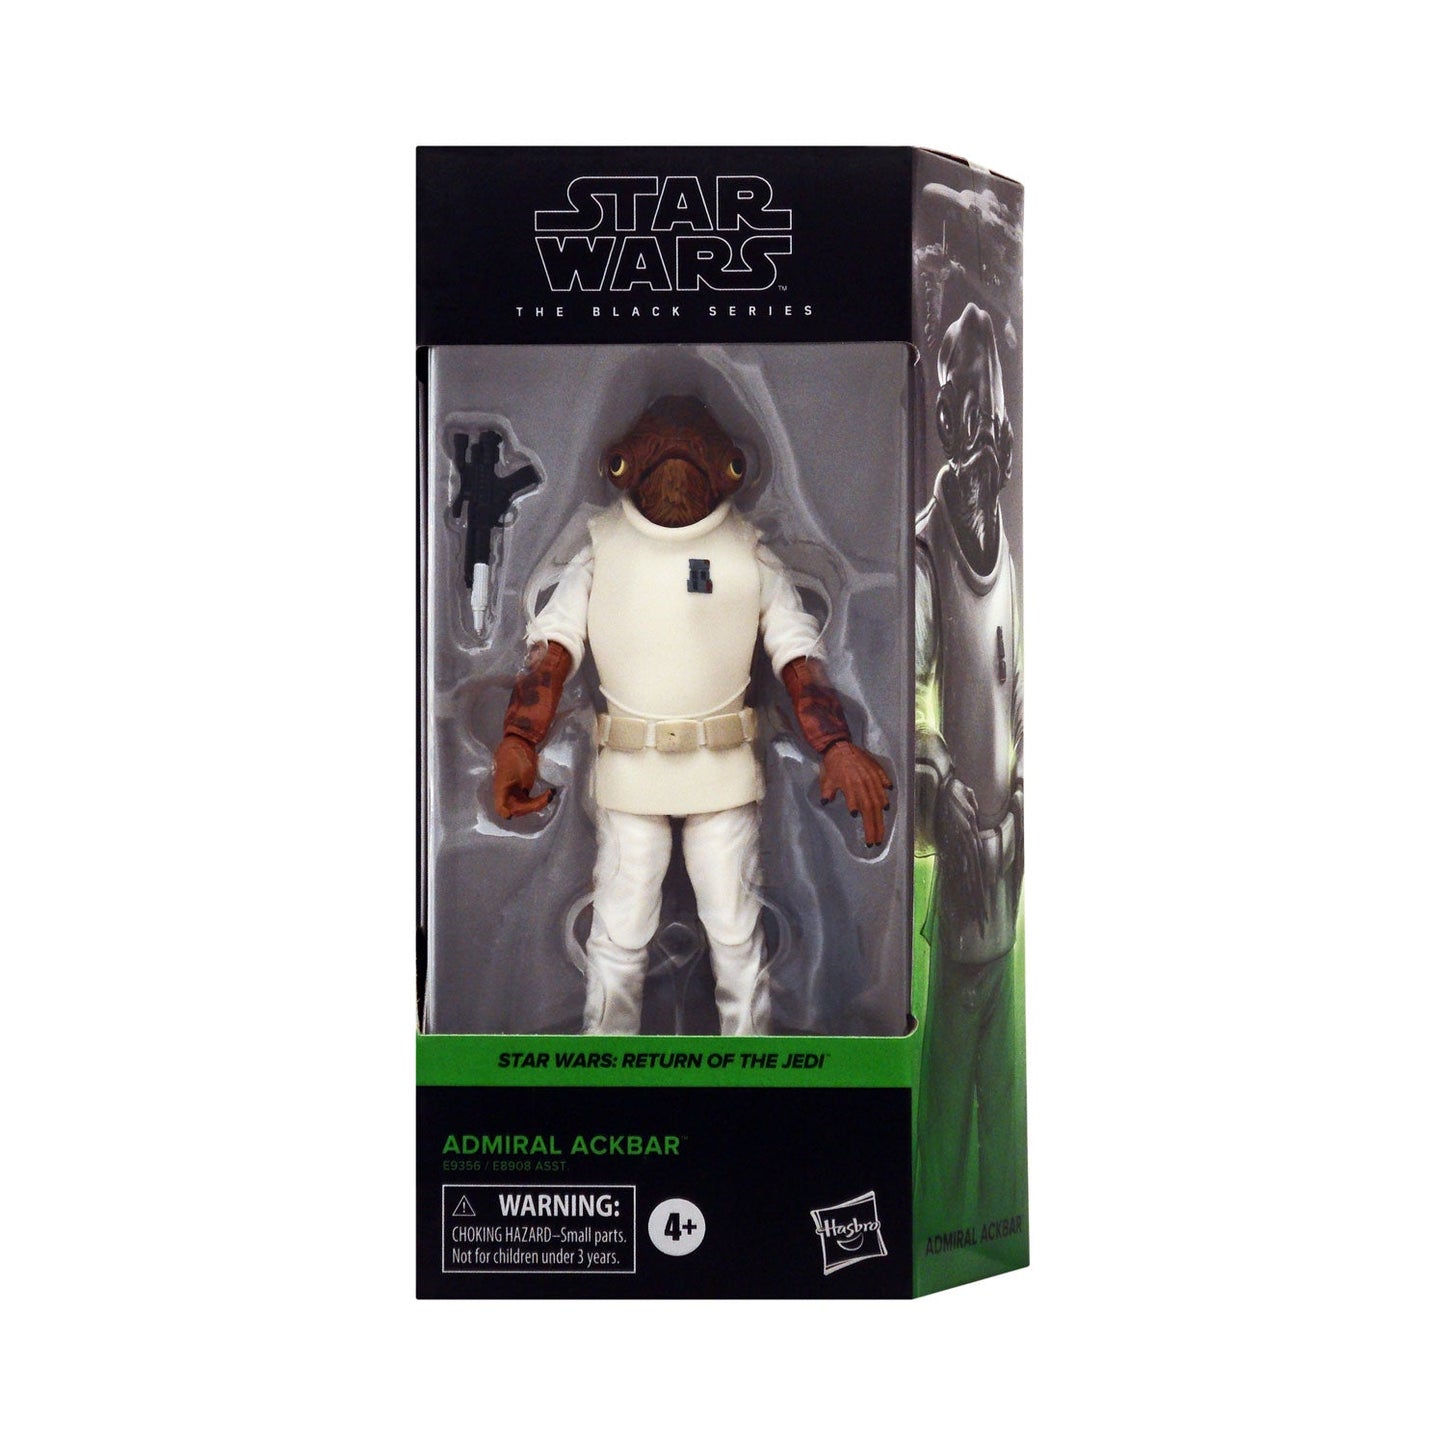 Star Wars: The Black Series Admiral Ackbar 6-Inch Action Figure from Star Wars: Return of the Jedi